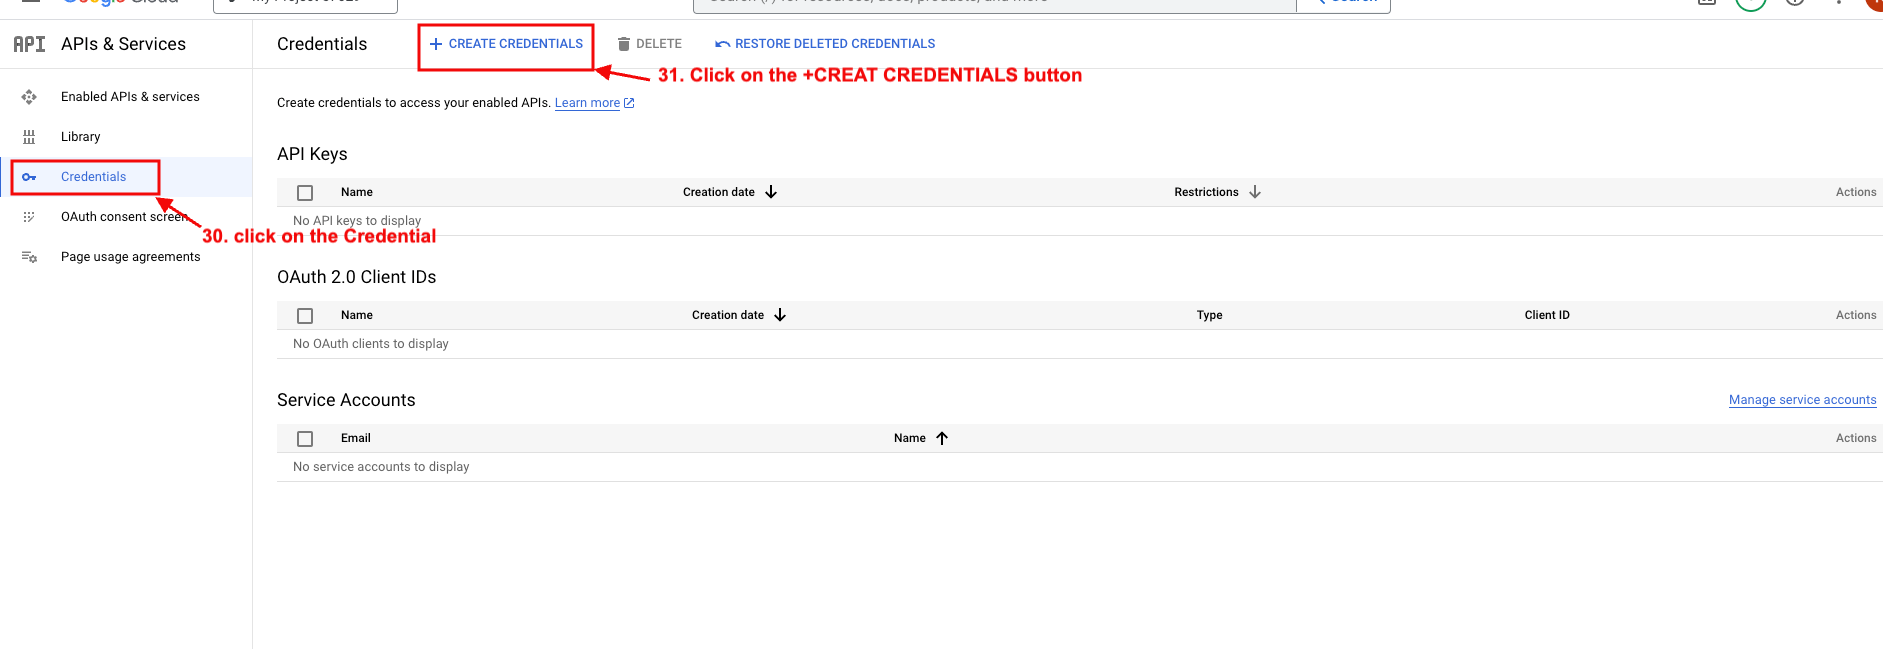 OAuth consent screen page1